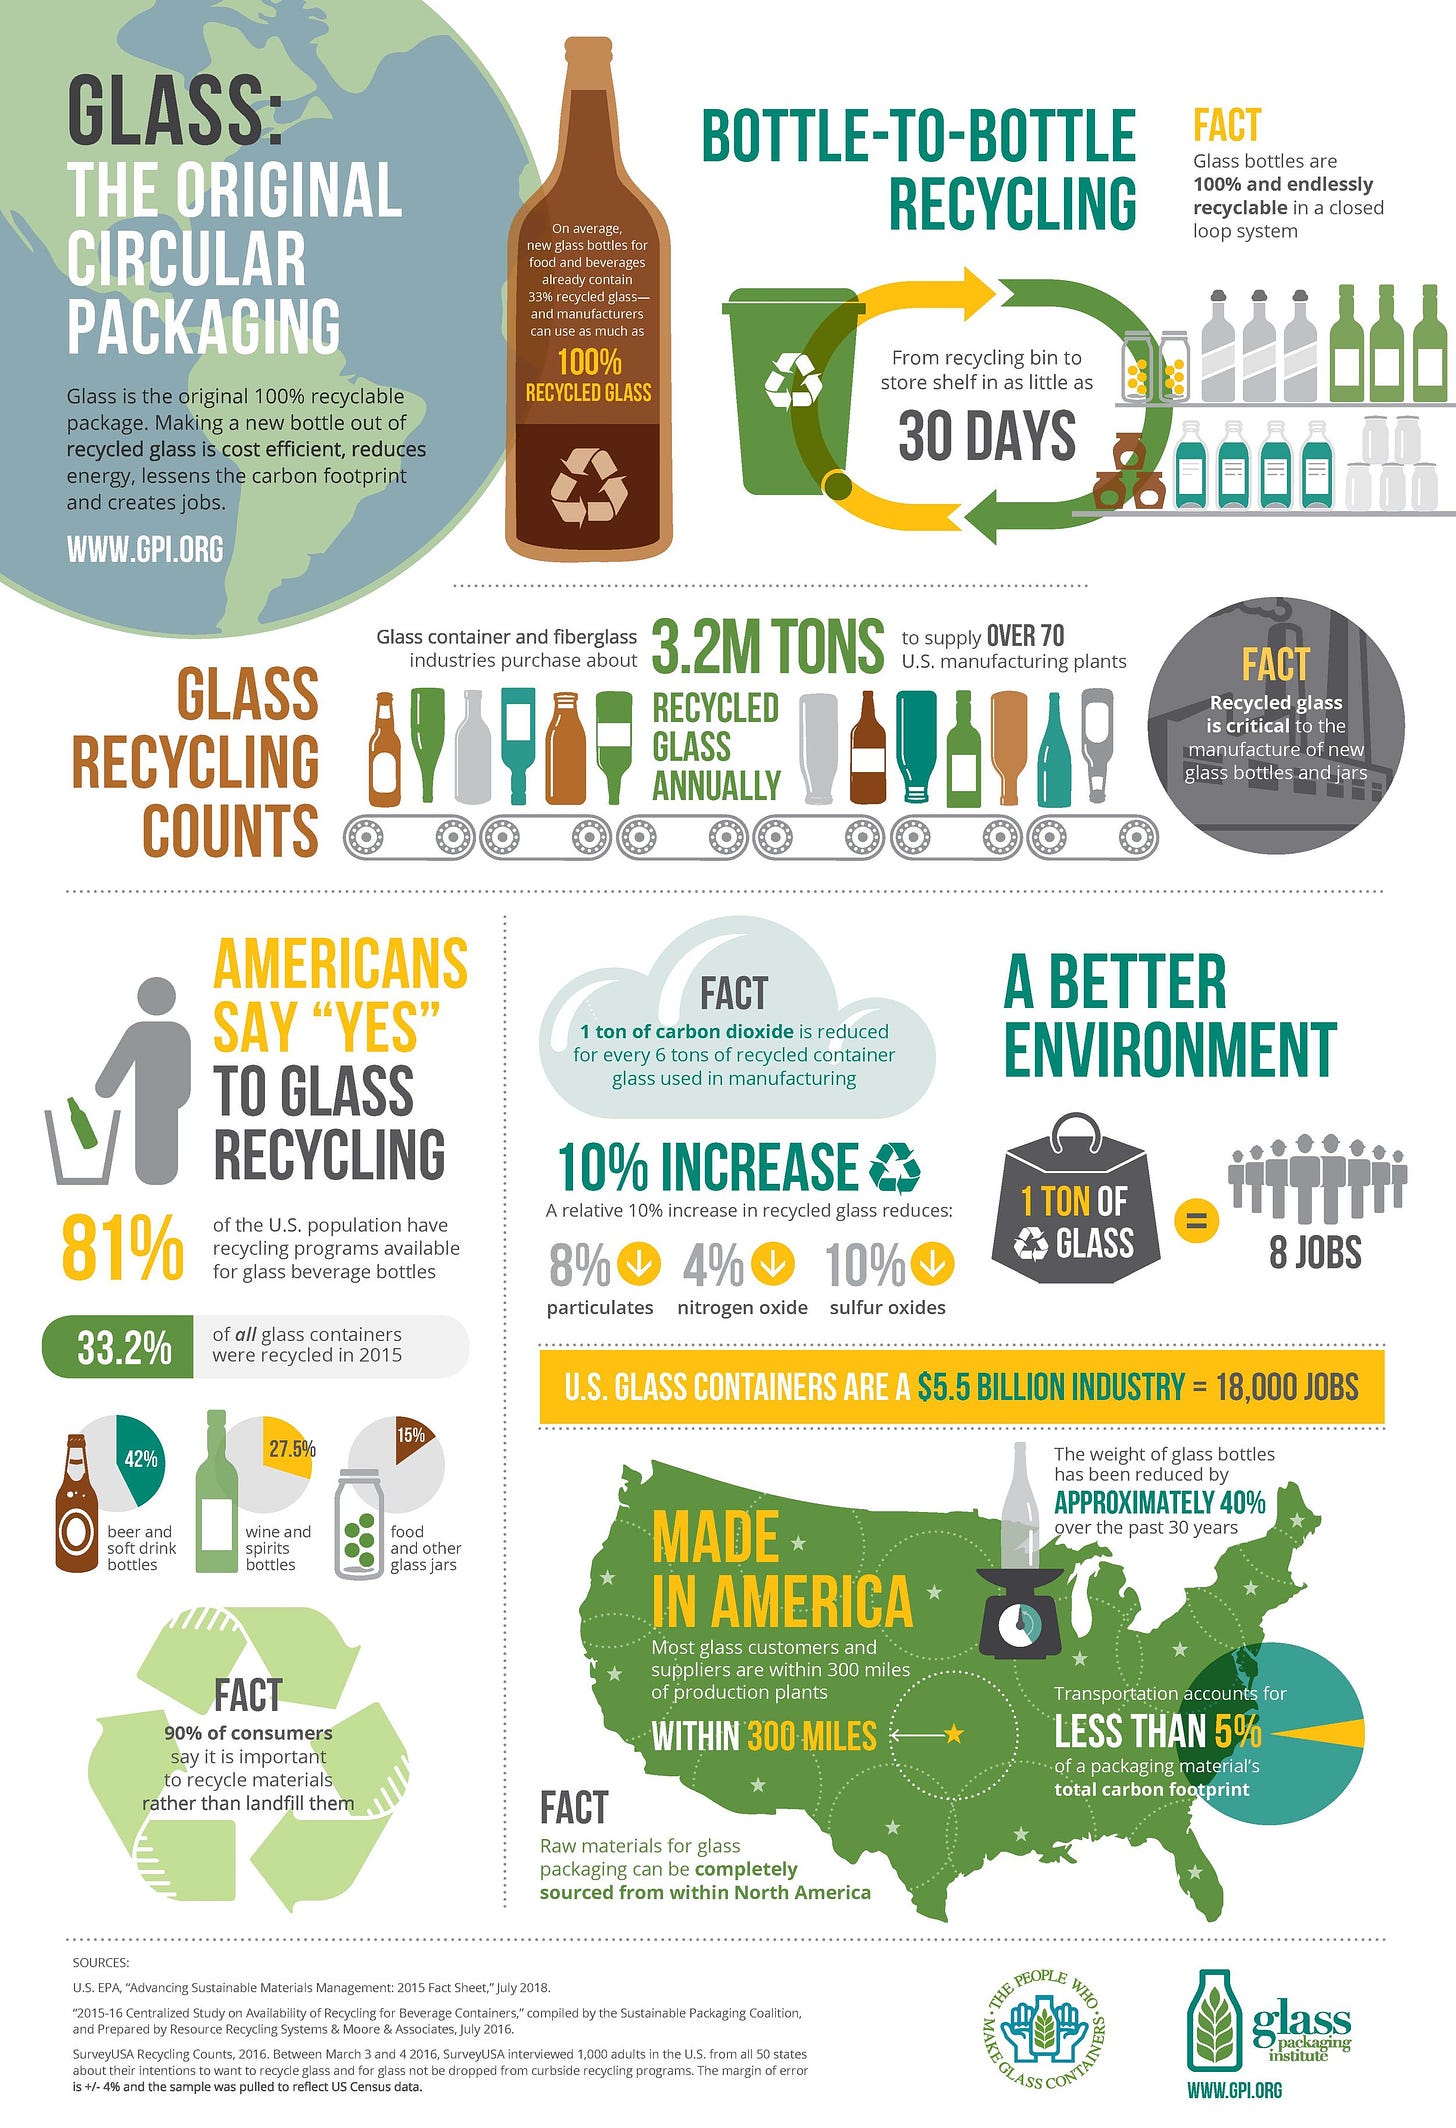 Glass Recycling 101 — Glass Recycling Coalition